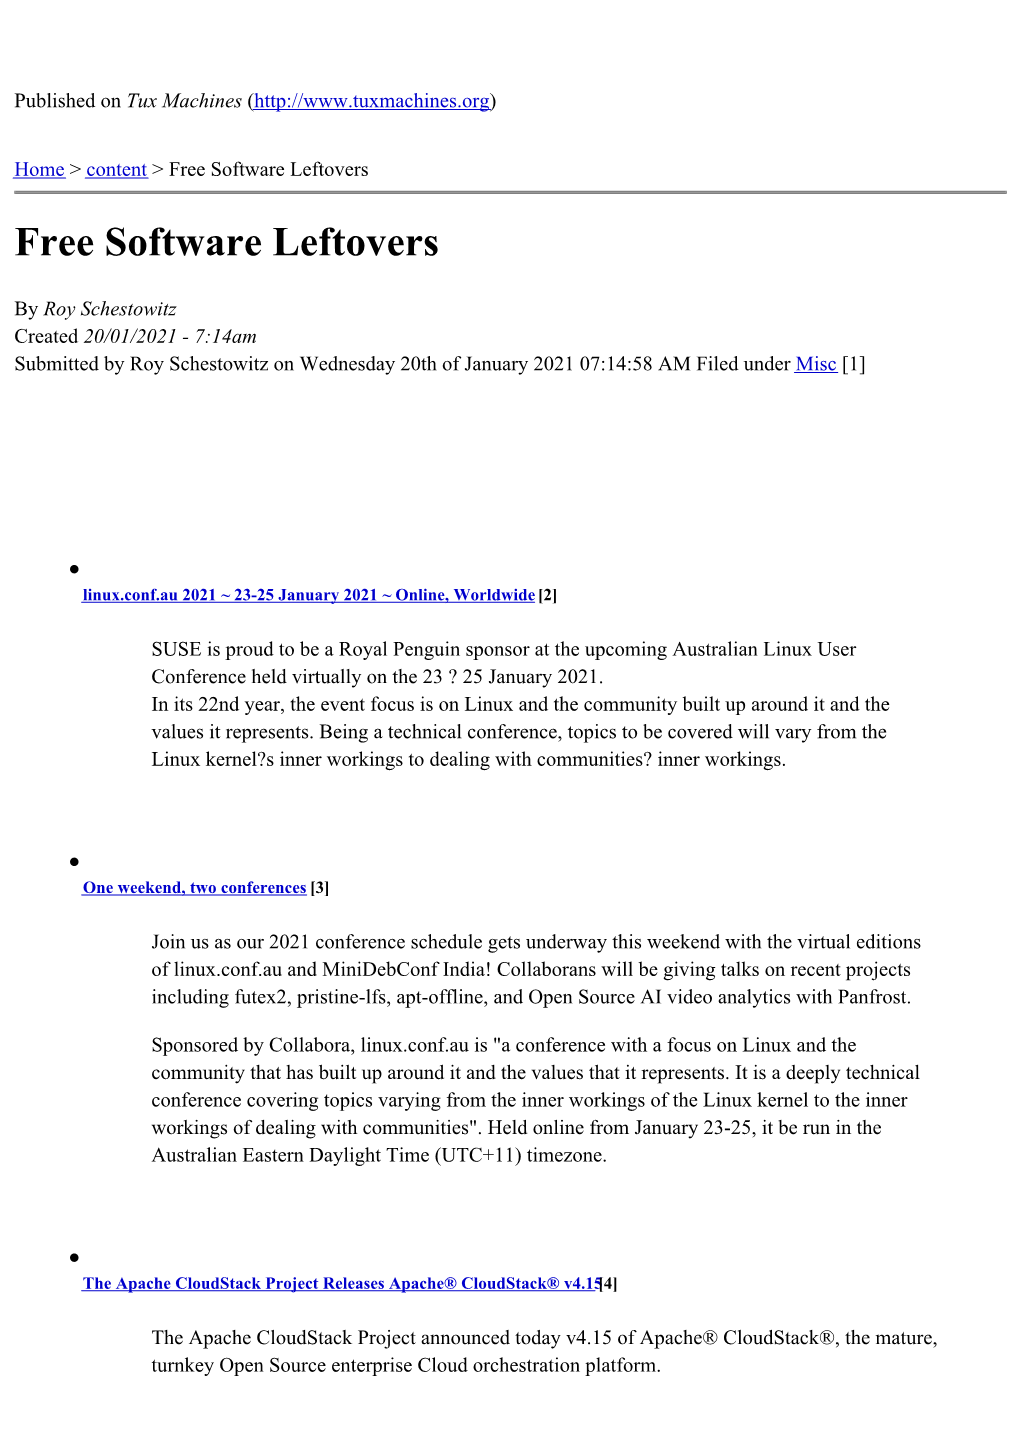 Free Software Leftovers